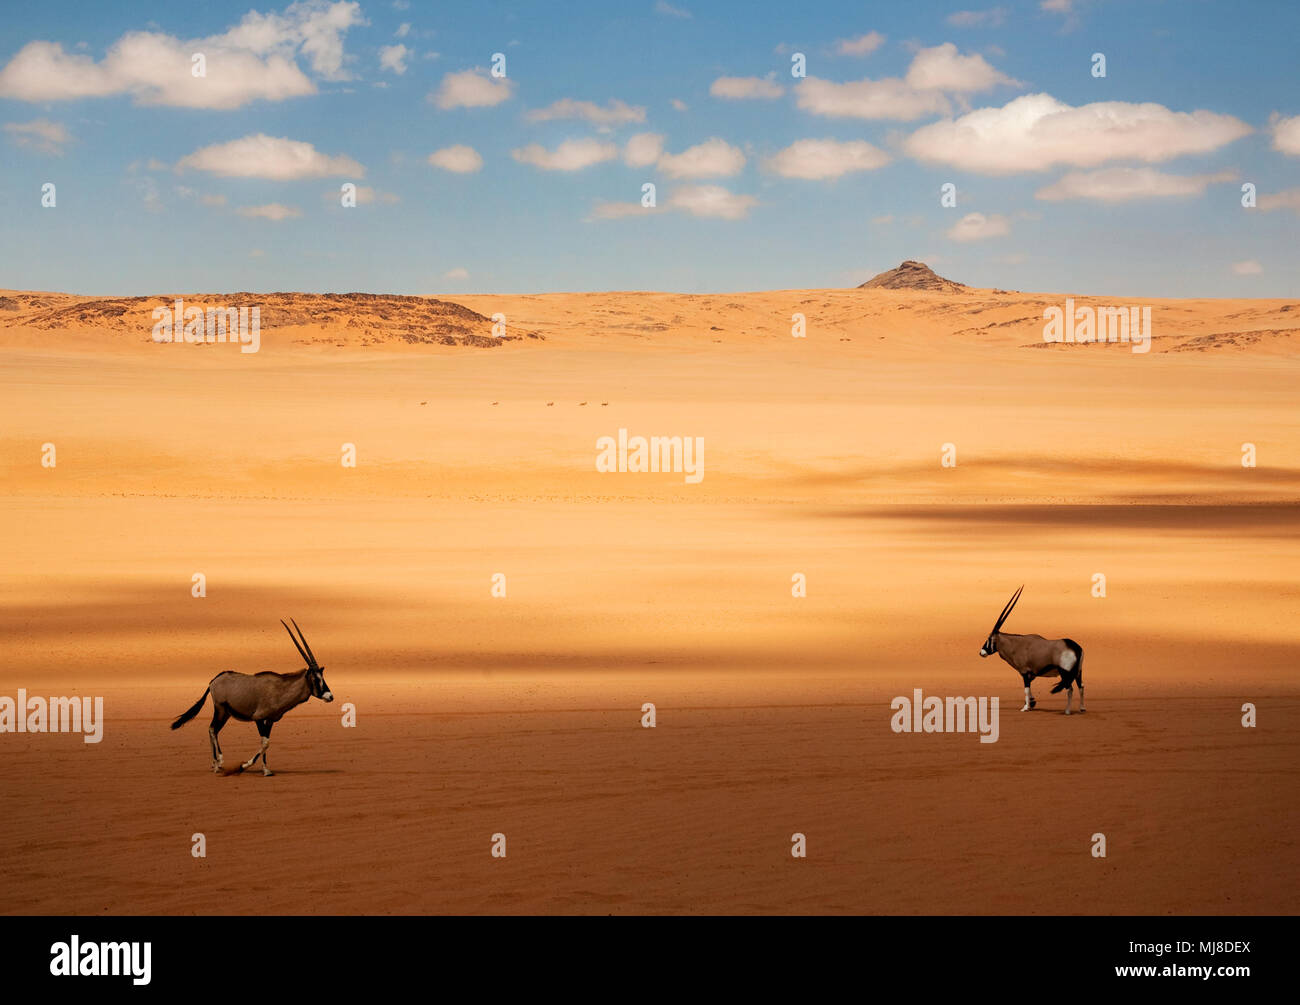 Two oryx standing in the African desert. Stock Photo